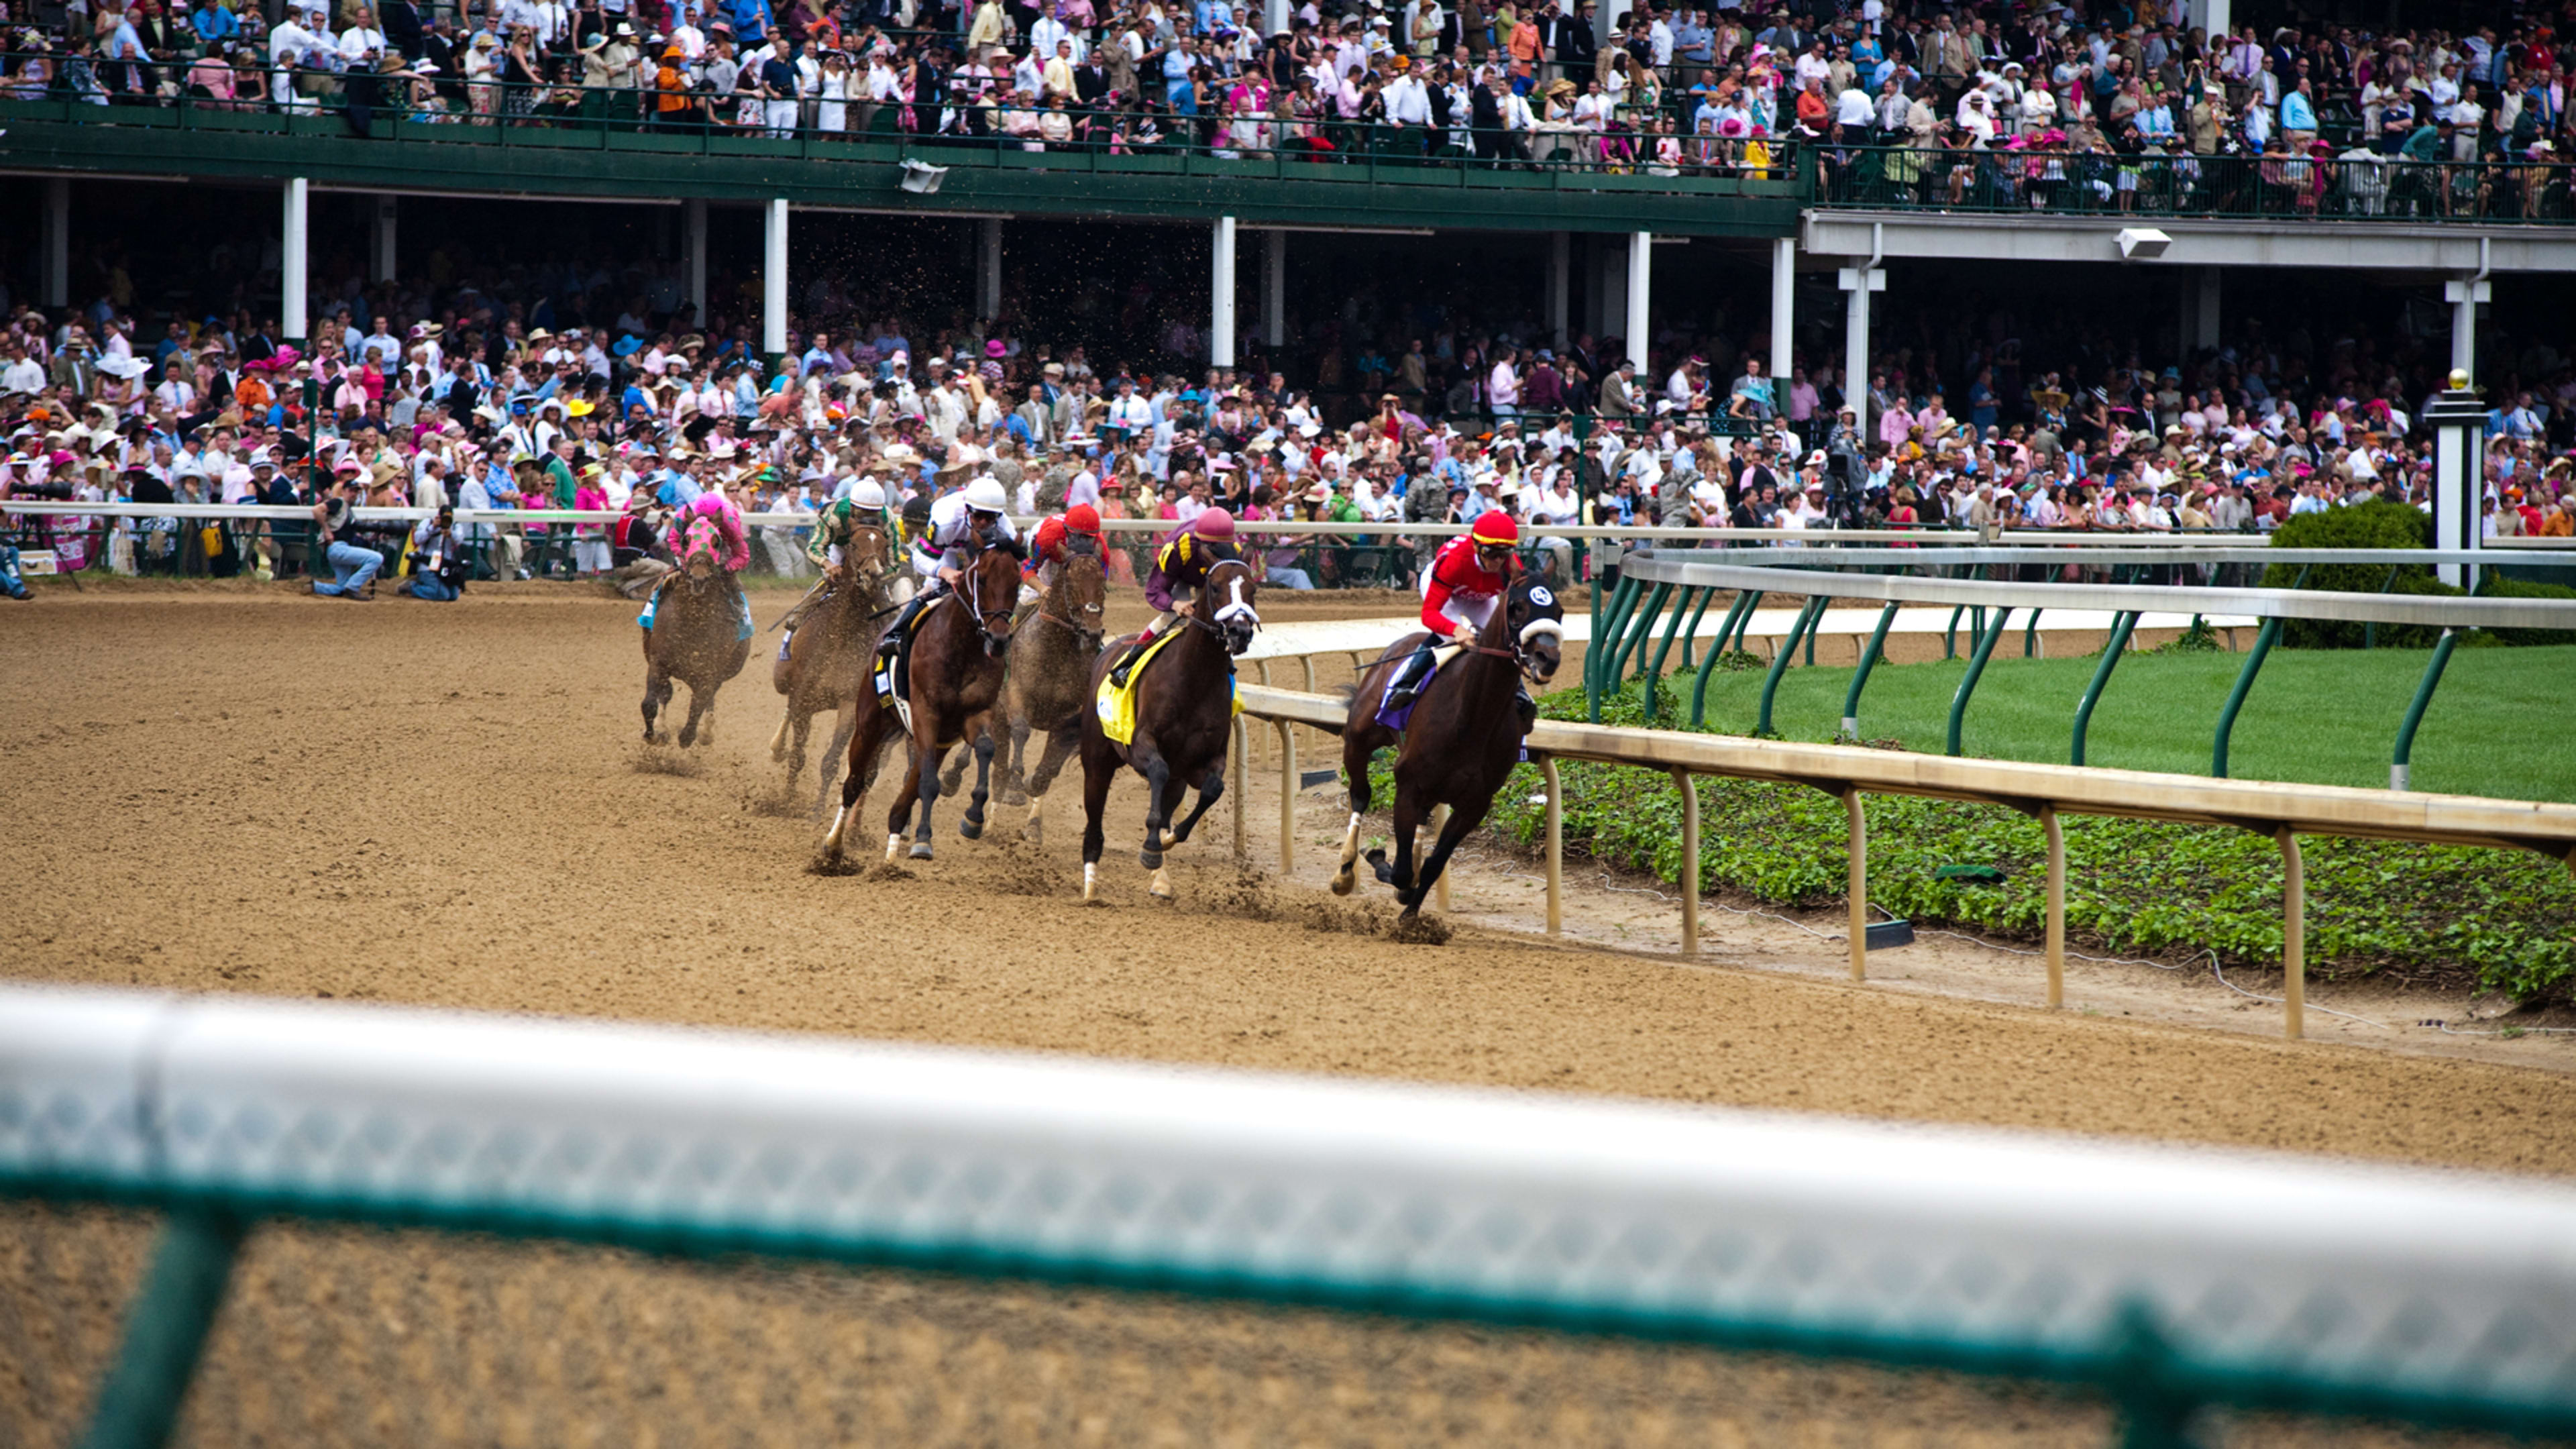 Kentucky Derby live-stream 2018: How to watch the big horse race without a TV